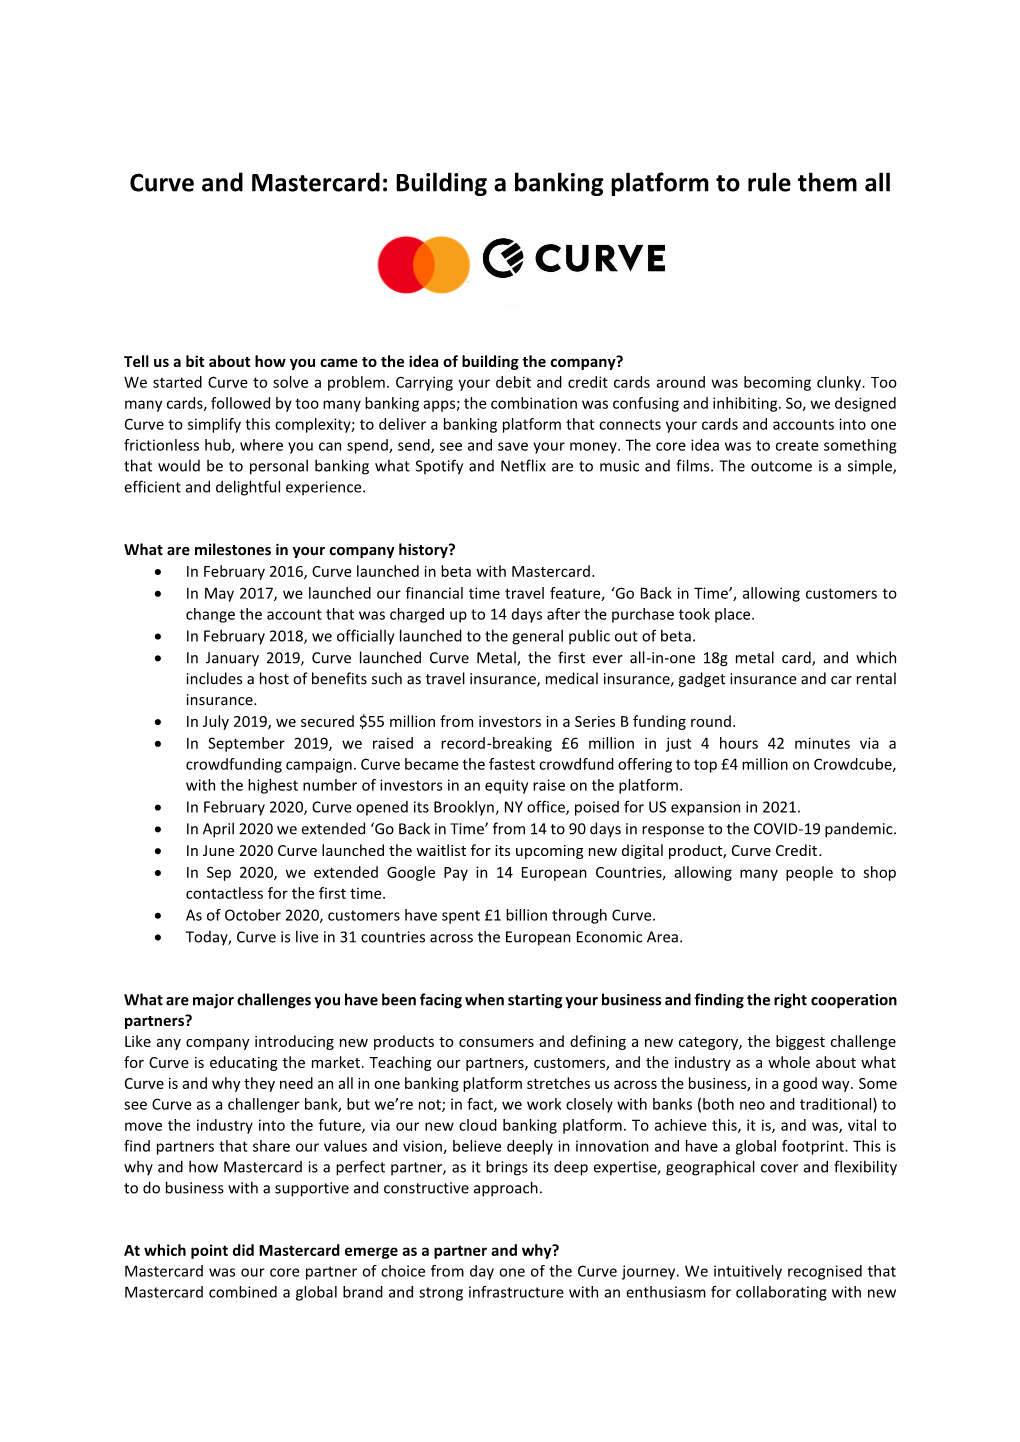 Curve and Mastercard: Building a Banking Platform to Rule Them All